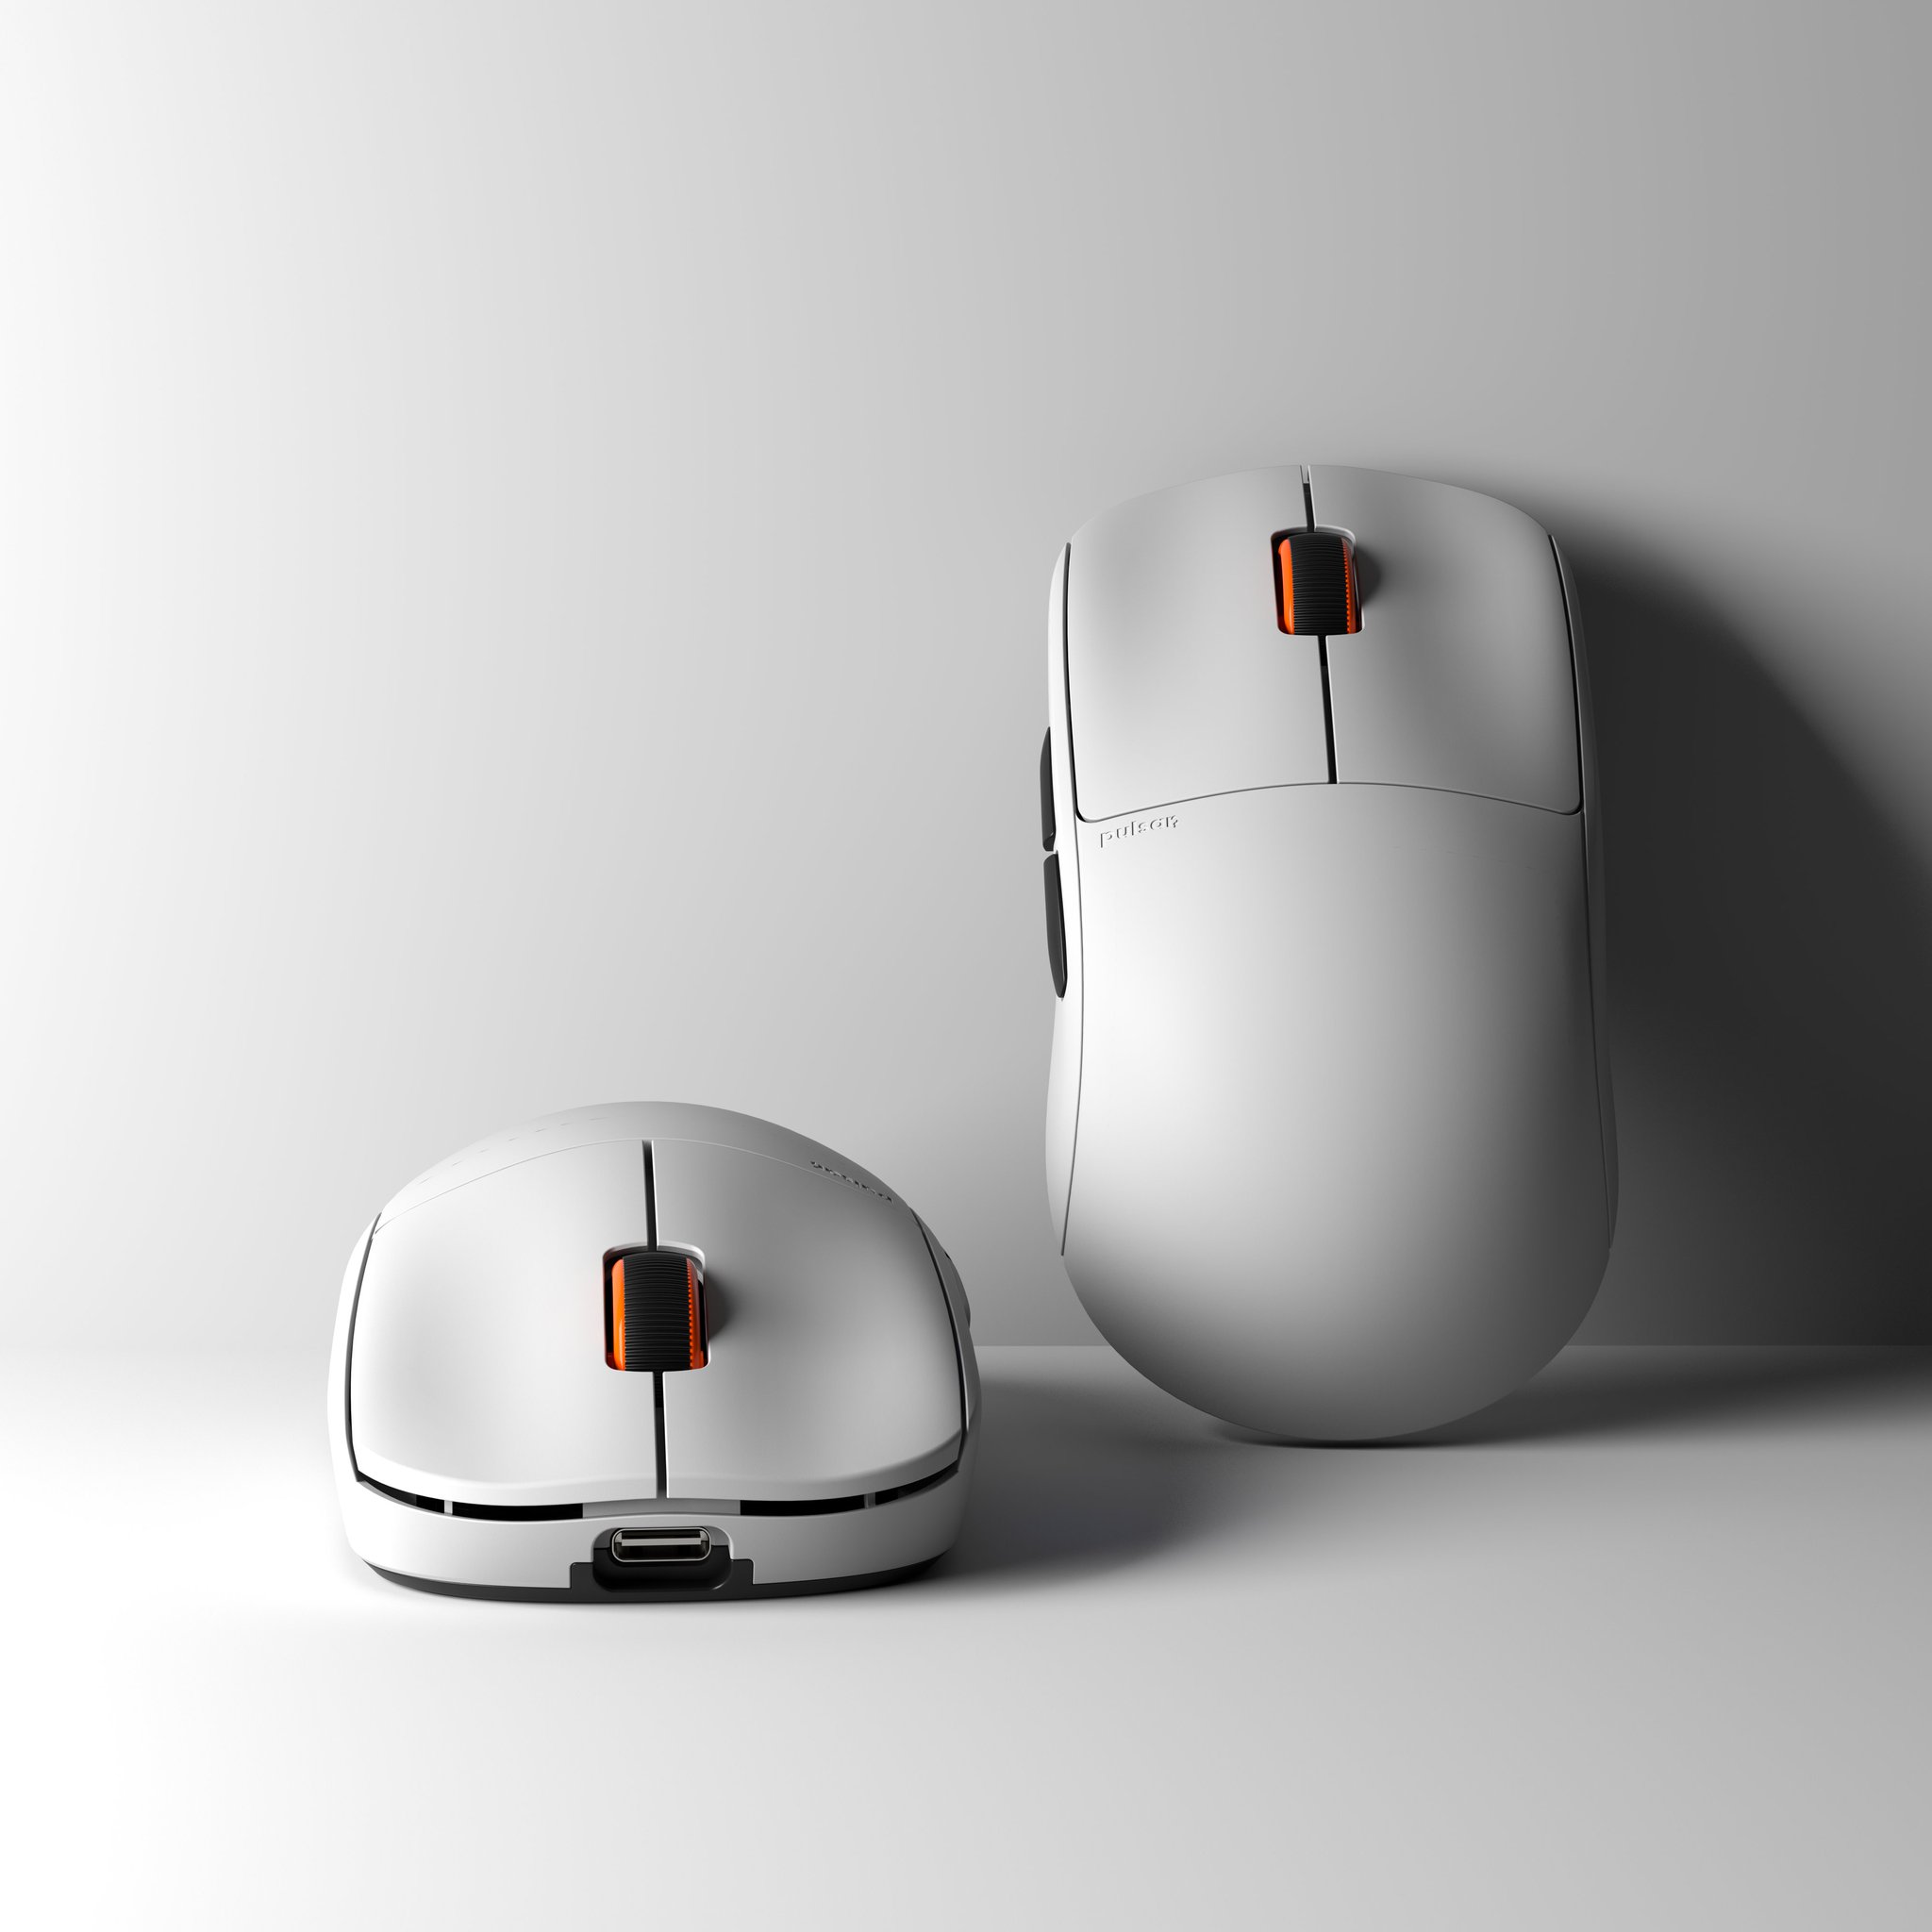 [Aim Trainer Pack] X2 Gaming Mouse